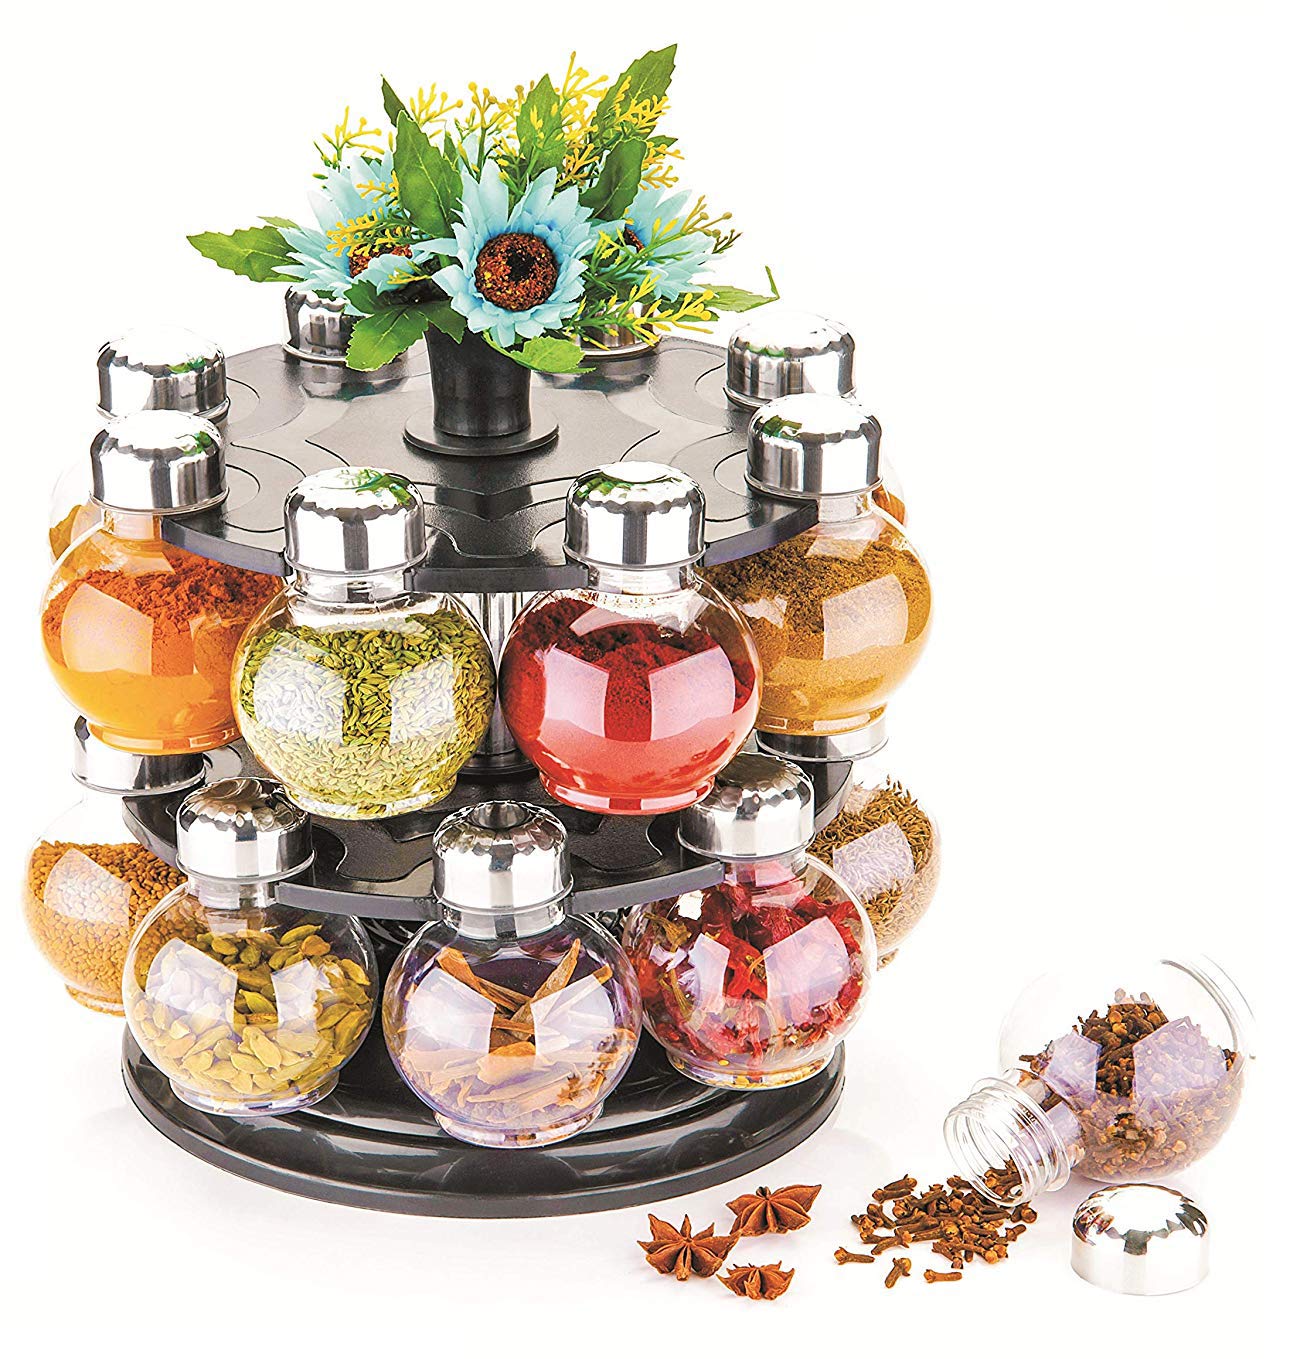 360 Degree Revolving Round Shape Transparent Spice Rack, Container Spice Stand For Kitchen Storage Container Rack Sets Spice Racks Containers - New House Gift